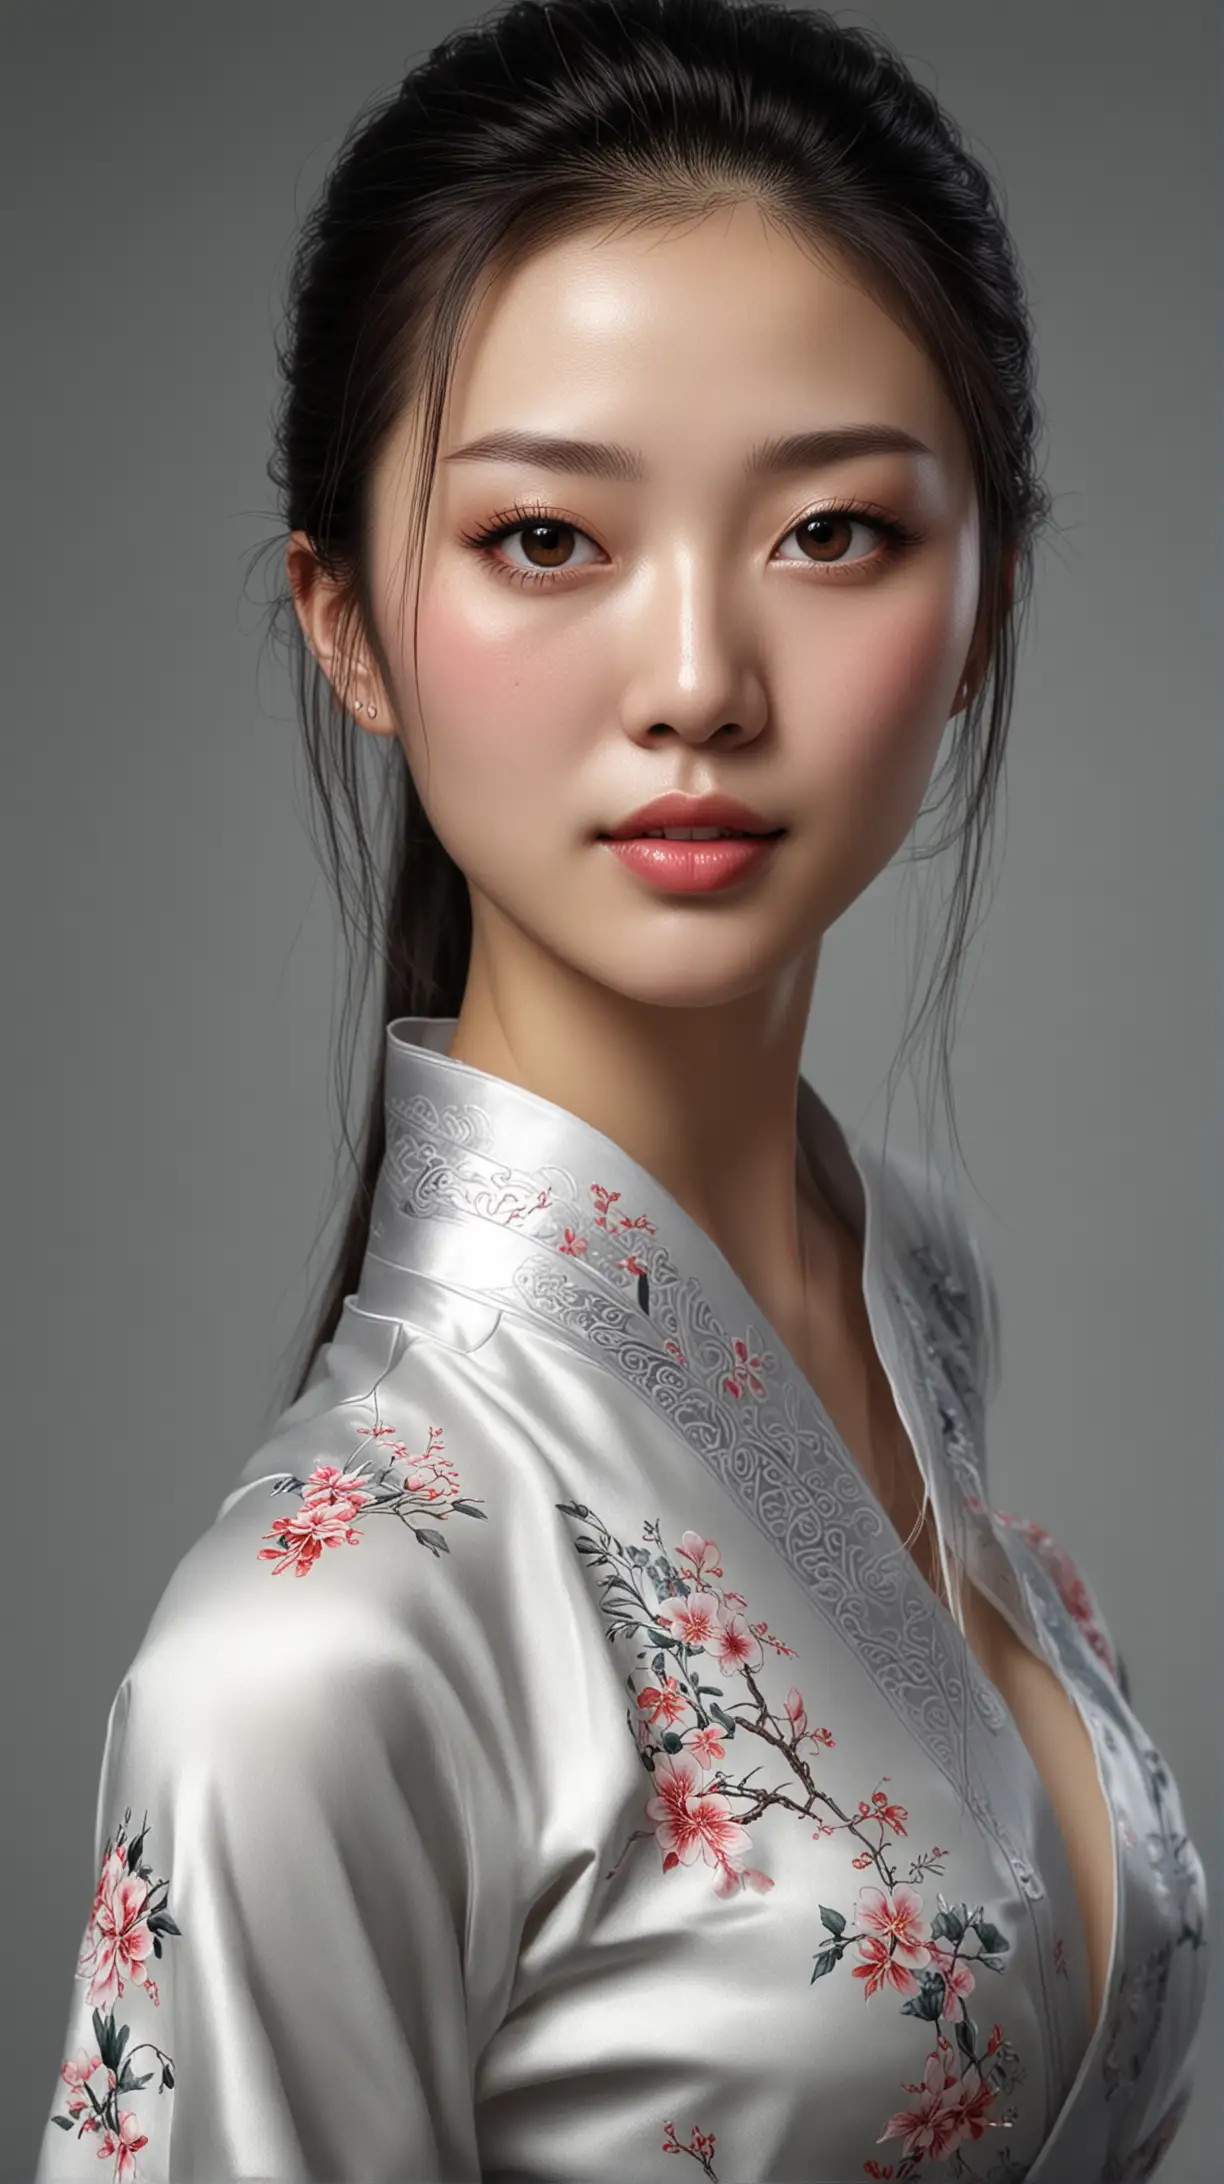 Hyper Realistic Portrait of a Beautiful Chinese Woman